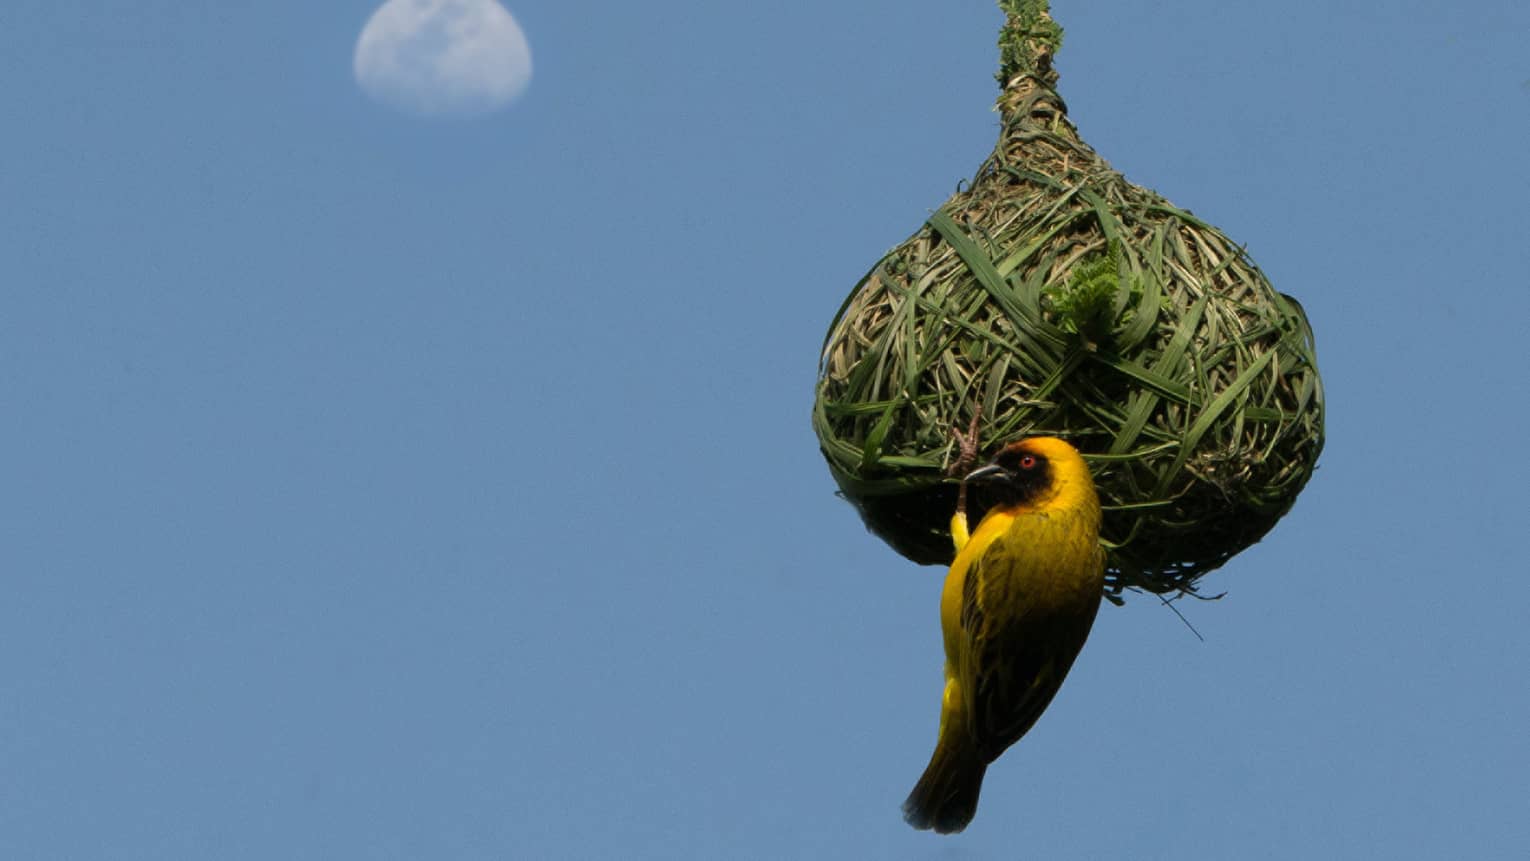 Yellow black-beaked bird hangs on green thatched birdhouse, blue sky and moon in backdrop